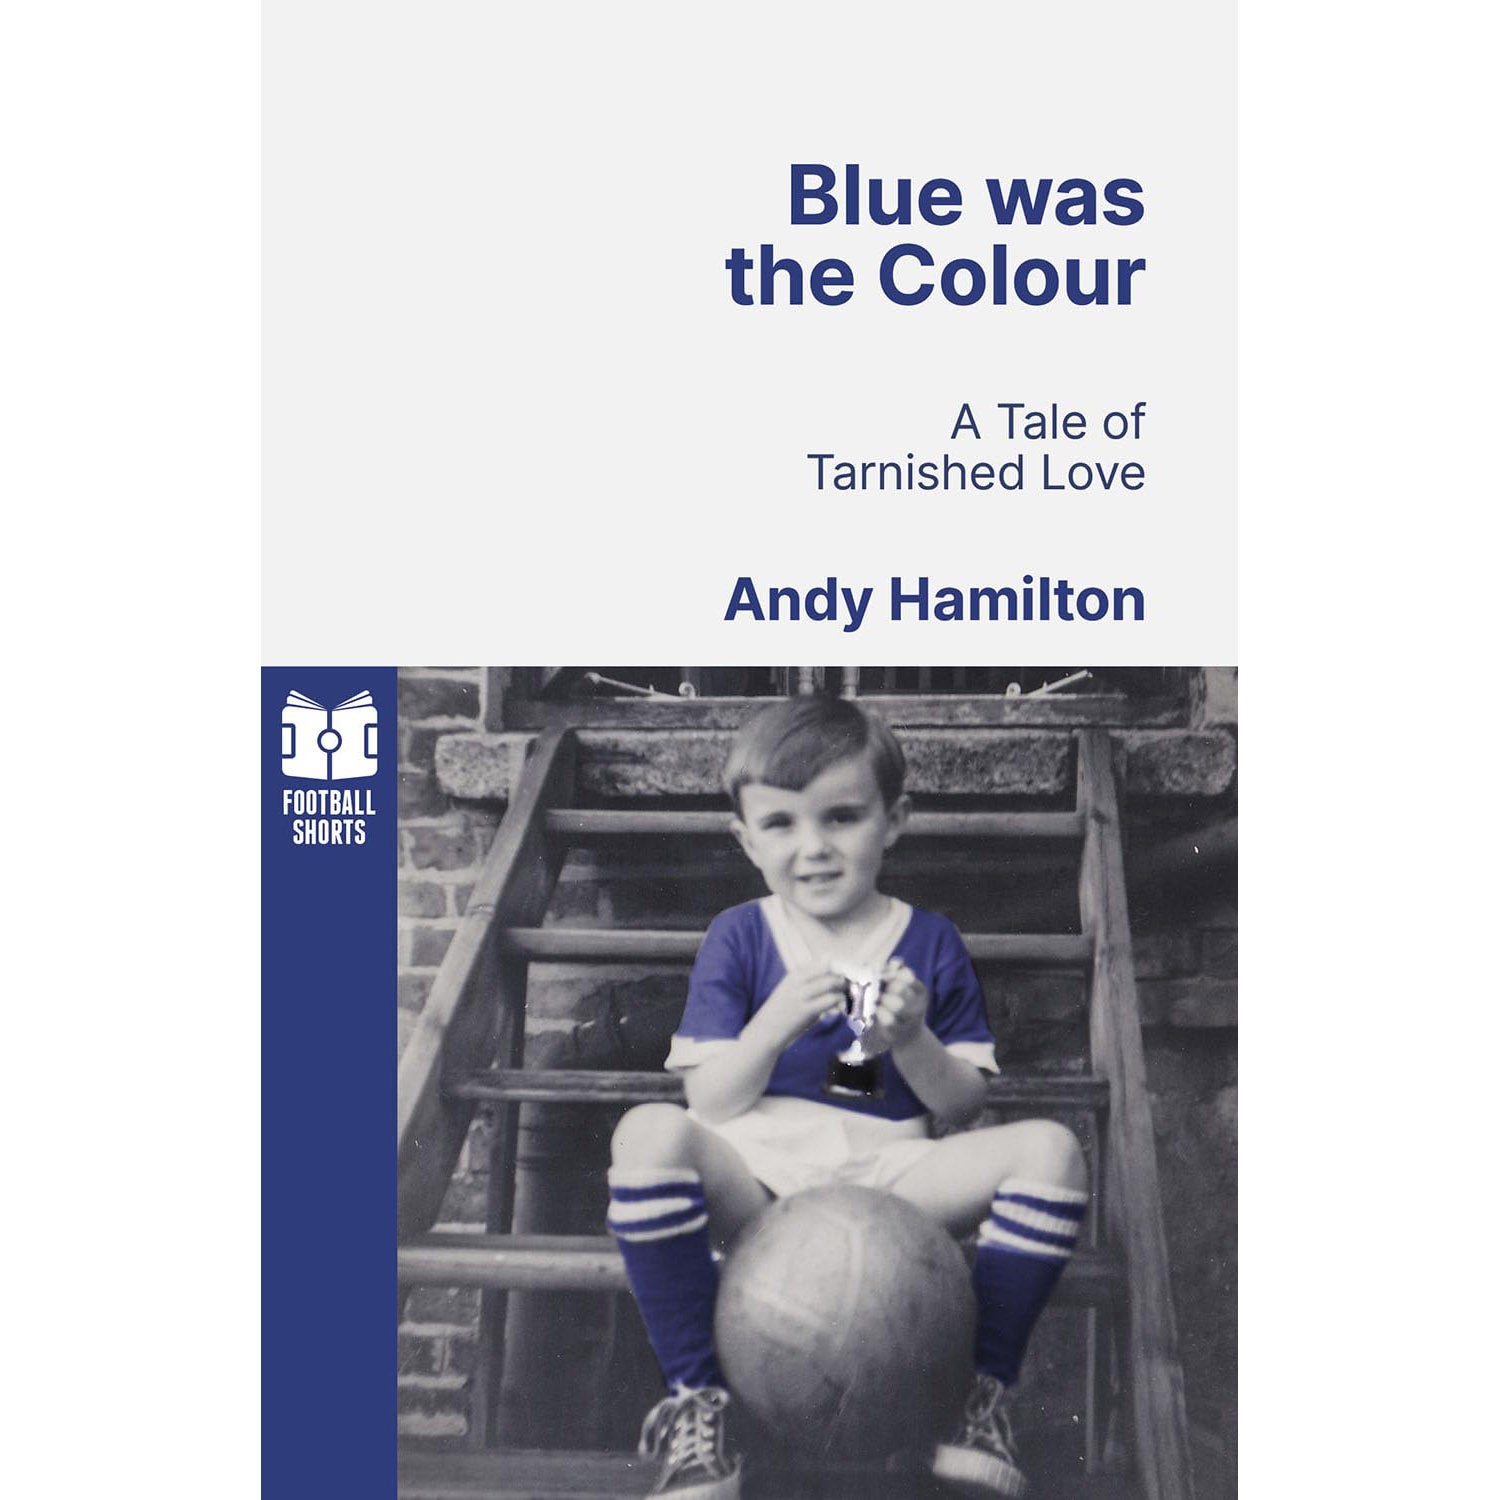 Blue was the Colour – A Tale of Tarnished Love